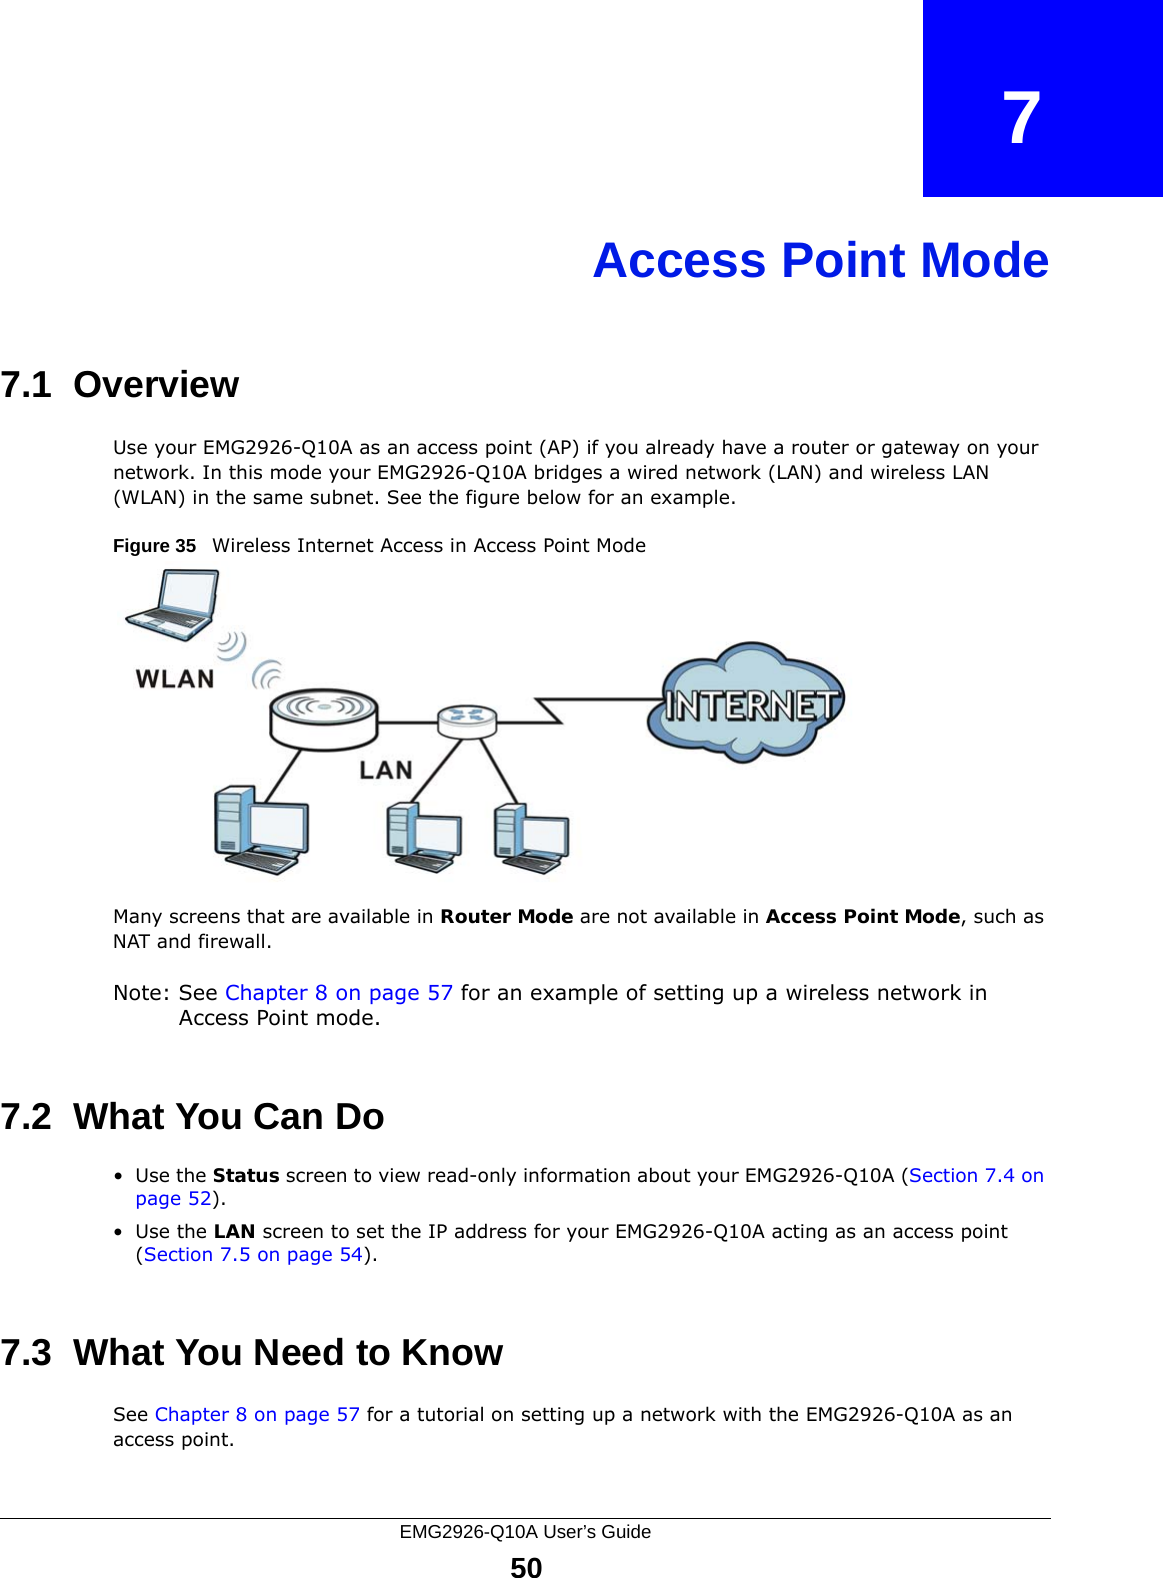 EMG2926-Q10A User’s Guide50CHAPTER   7Access Point Mode7.1  OverviewUse your EMG2926-Q10A as an access point (AP) if you already have a router or gateway on your network. In this mode your EMG2926-Q10A bridges a wired network (LAN) and wireless LAN (WLAN) in the same subnet. See the figure below for an example.Figure 35   Wireless Internet Access in Access Point Mode Many screens that are available in Router Mode are not available in Access Point Mode, such as NAT and firewall.Note: See Chapter 8 on page 57 for an example of setting up a wireless network in Access Point mode. 7.2  What You Can Do•Use the Status screen to view read-only information about your EMG2926-Q10A (Section 7.4 on page 52).•Use the LAN screen to set the IP address for your EMG2926-Q10A acting as an access point (Section 7.5 on page 54).7.3  What You Need to KnowSee Chapter 8 on page 57 for a tutorial on setting up a network with the EMG2926-Q10A as an access point.